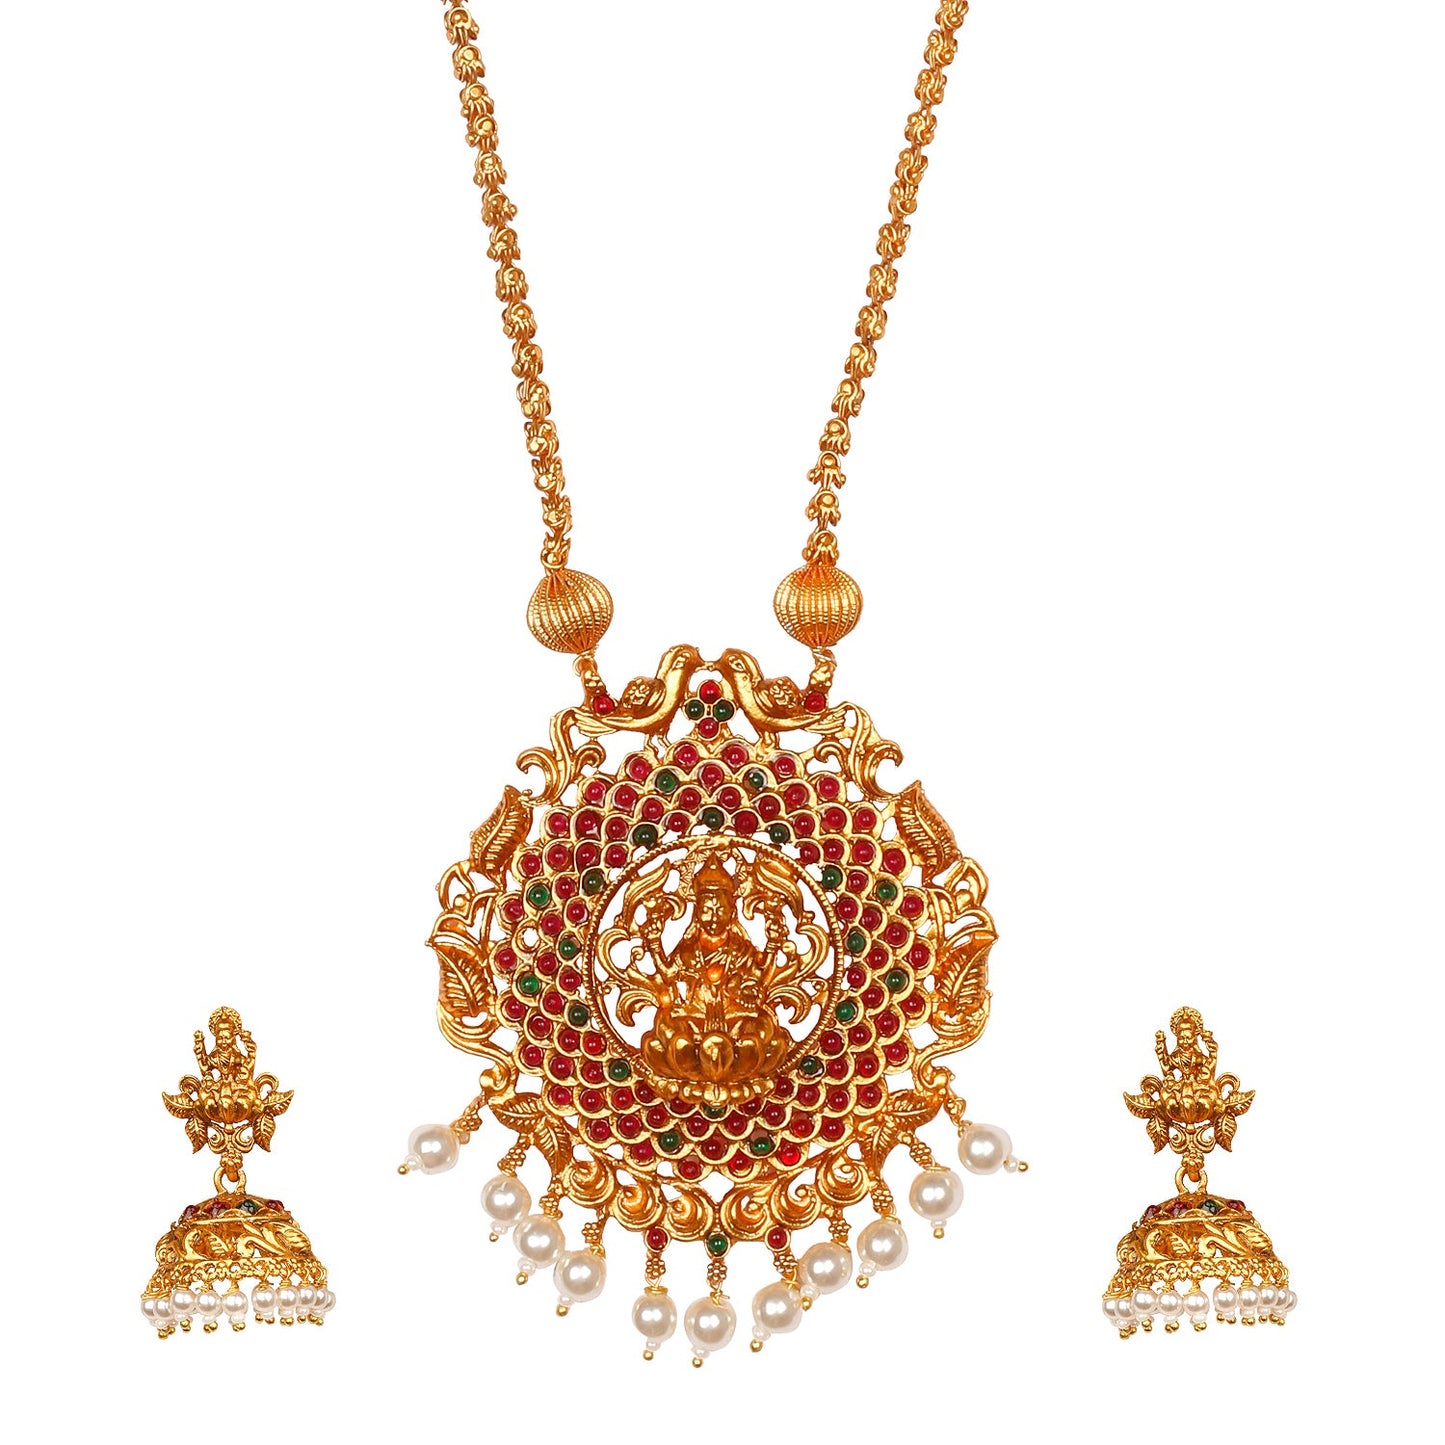 Handcrafted 18K Antique Gold Plated Godess Lakshmi Temple Jewellery Necklace With Matching Earring For Women (SJ_2902)